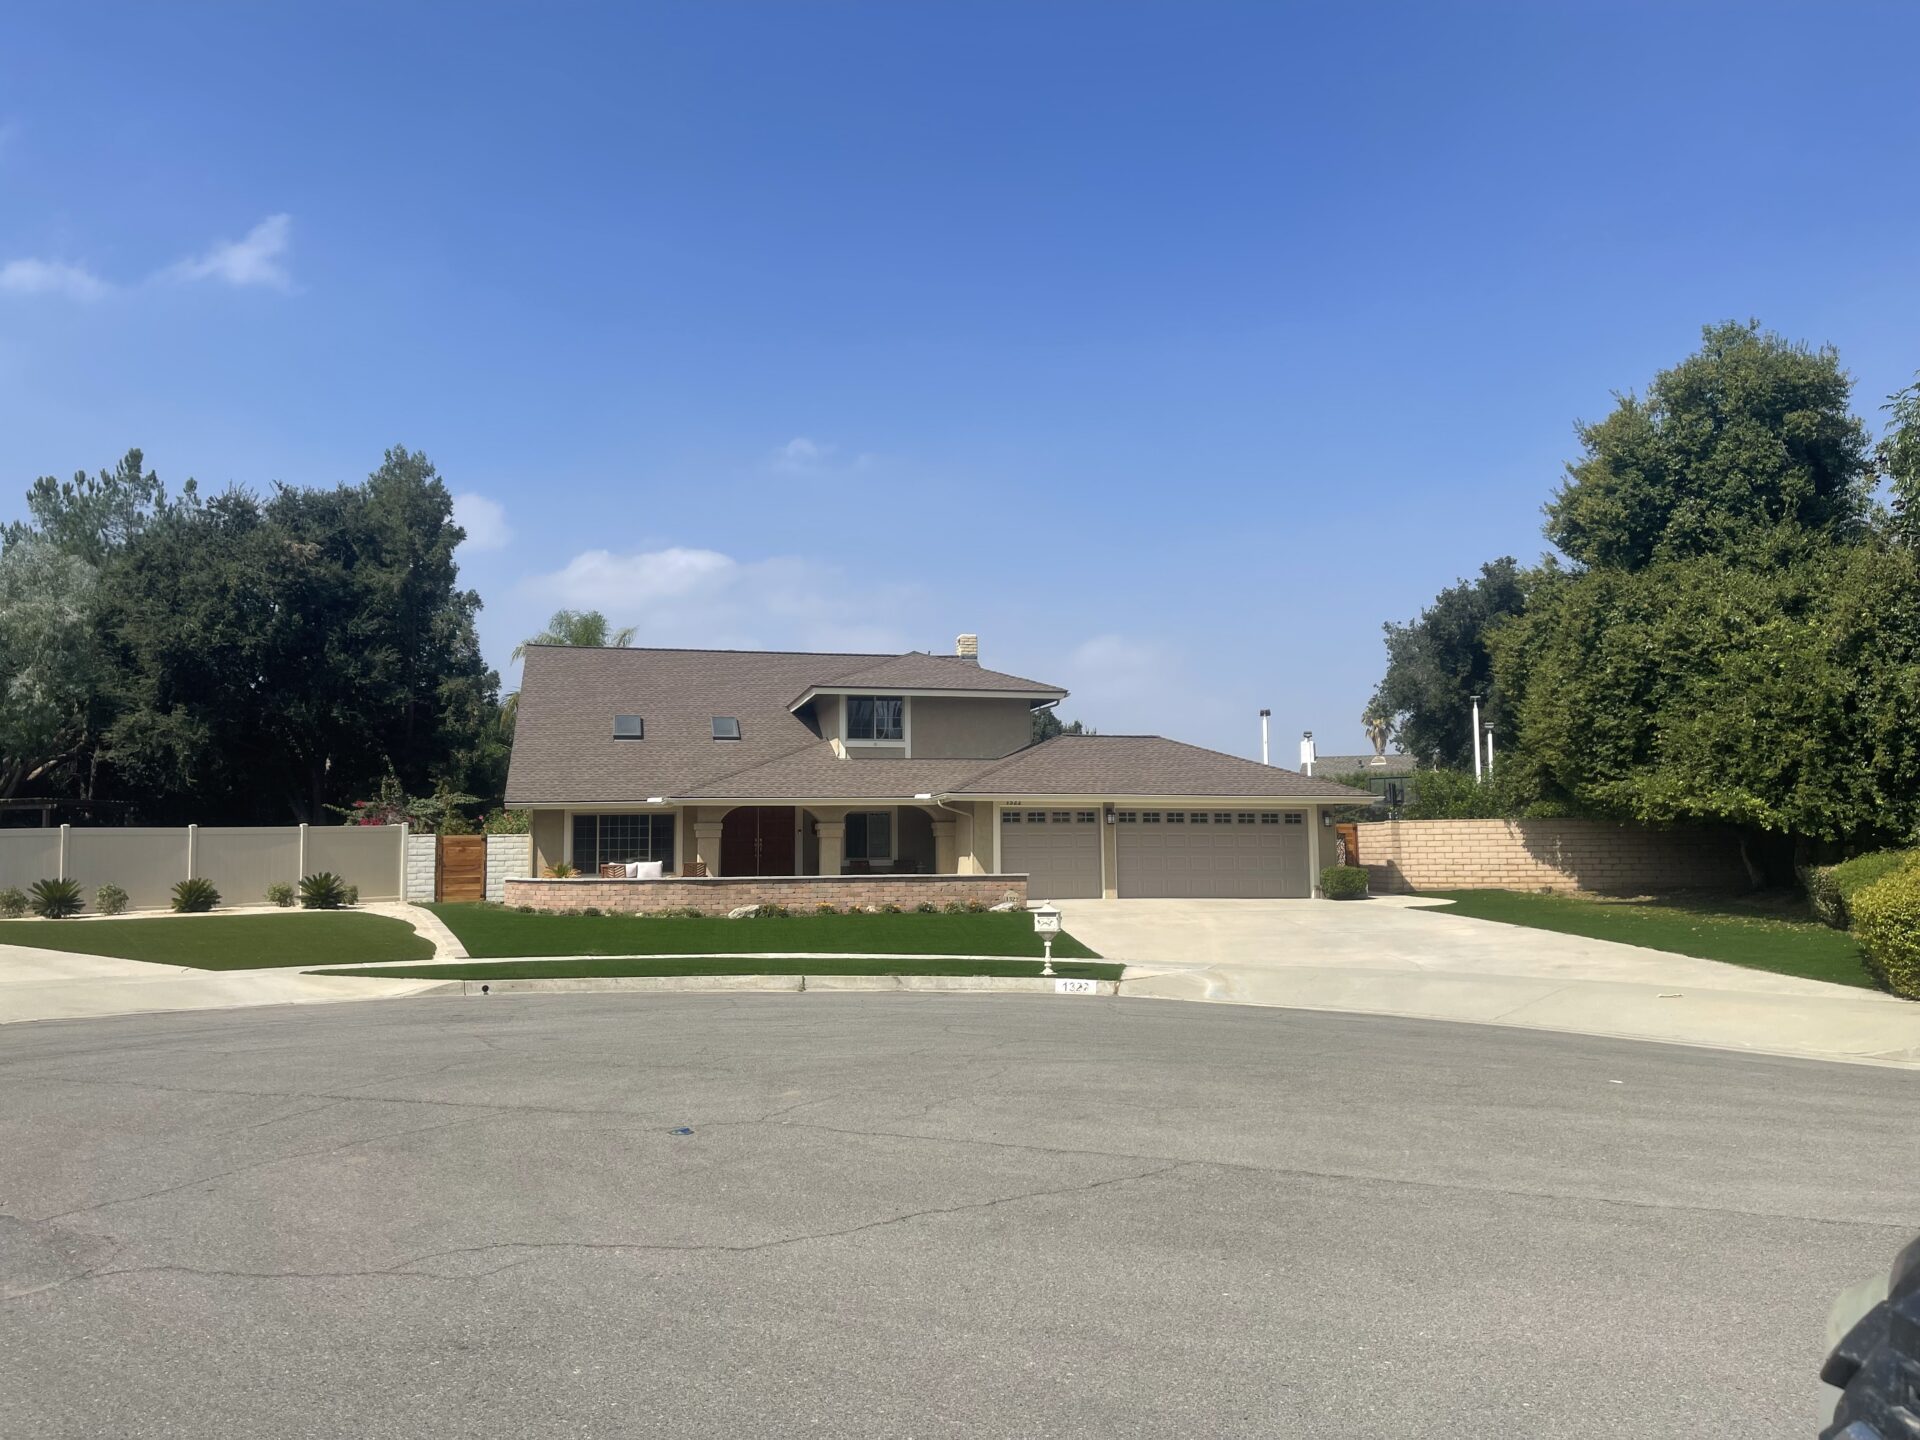 Gura Family Home in South Redlands, full roof replacement with removal of solar electric system and reinstall. This system was also a GAF Golden Pledge Roofing System was a warranty second to non. Please contact us to learn more.